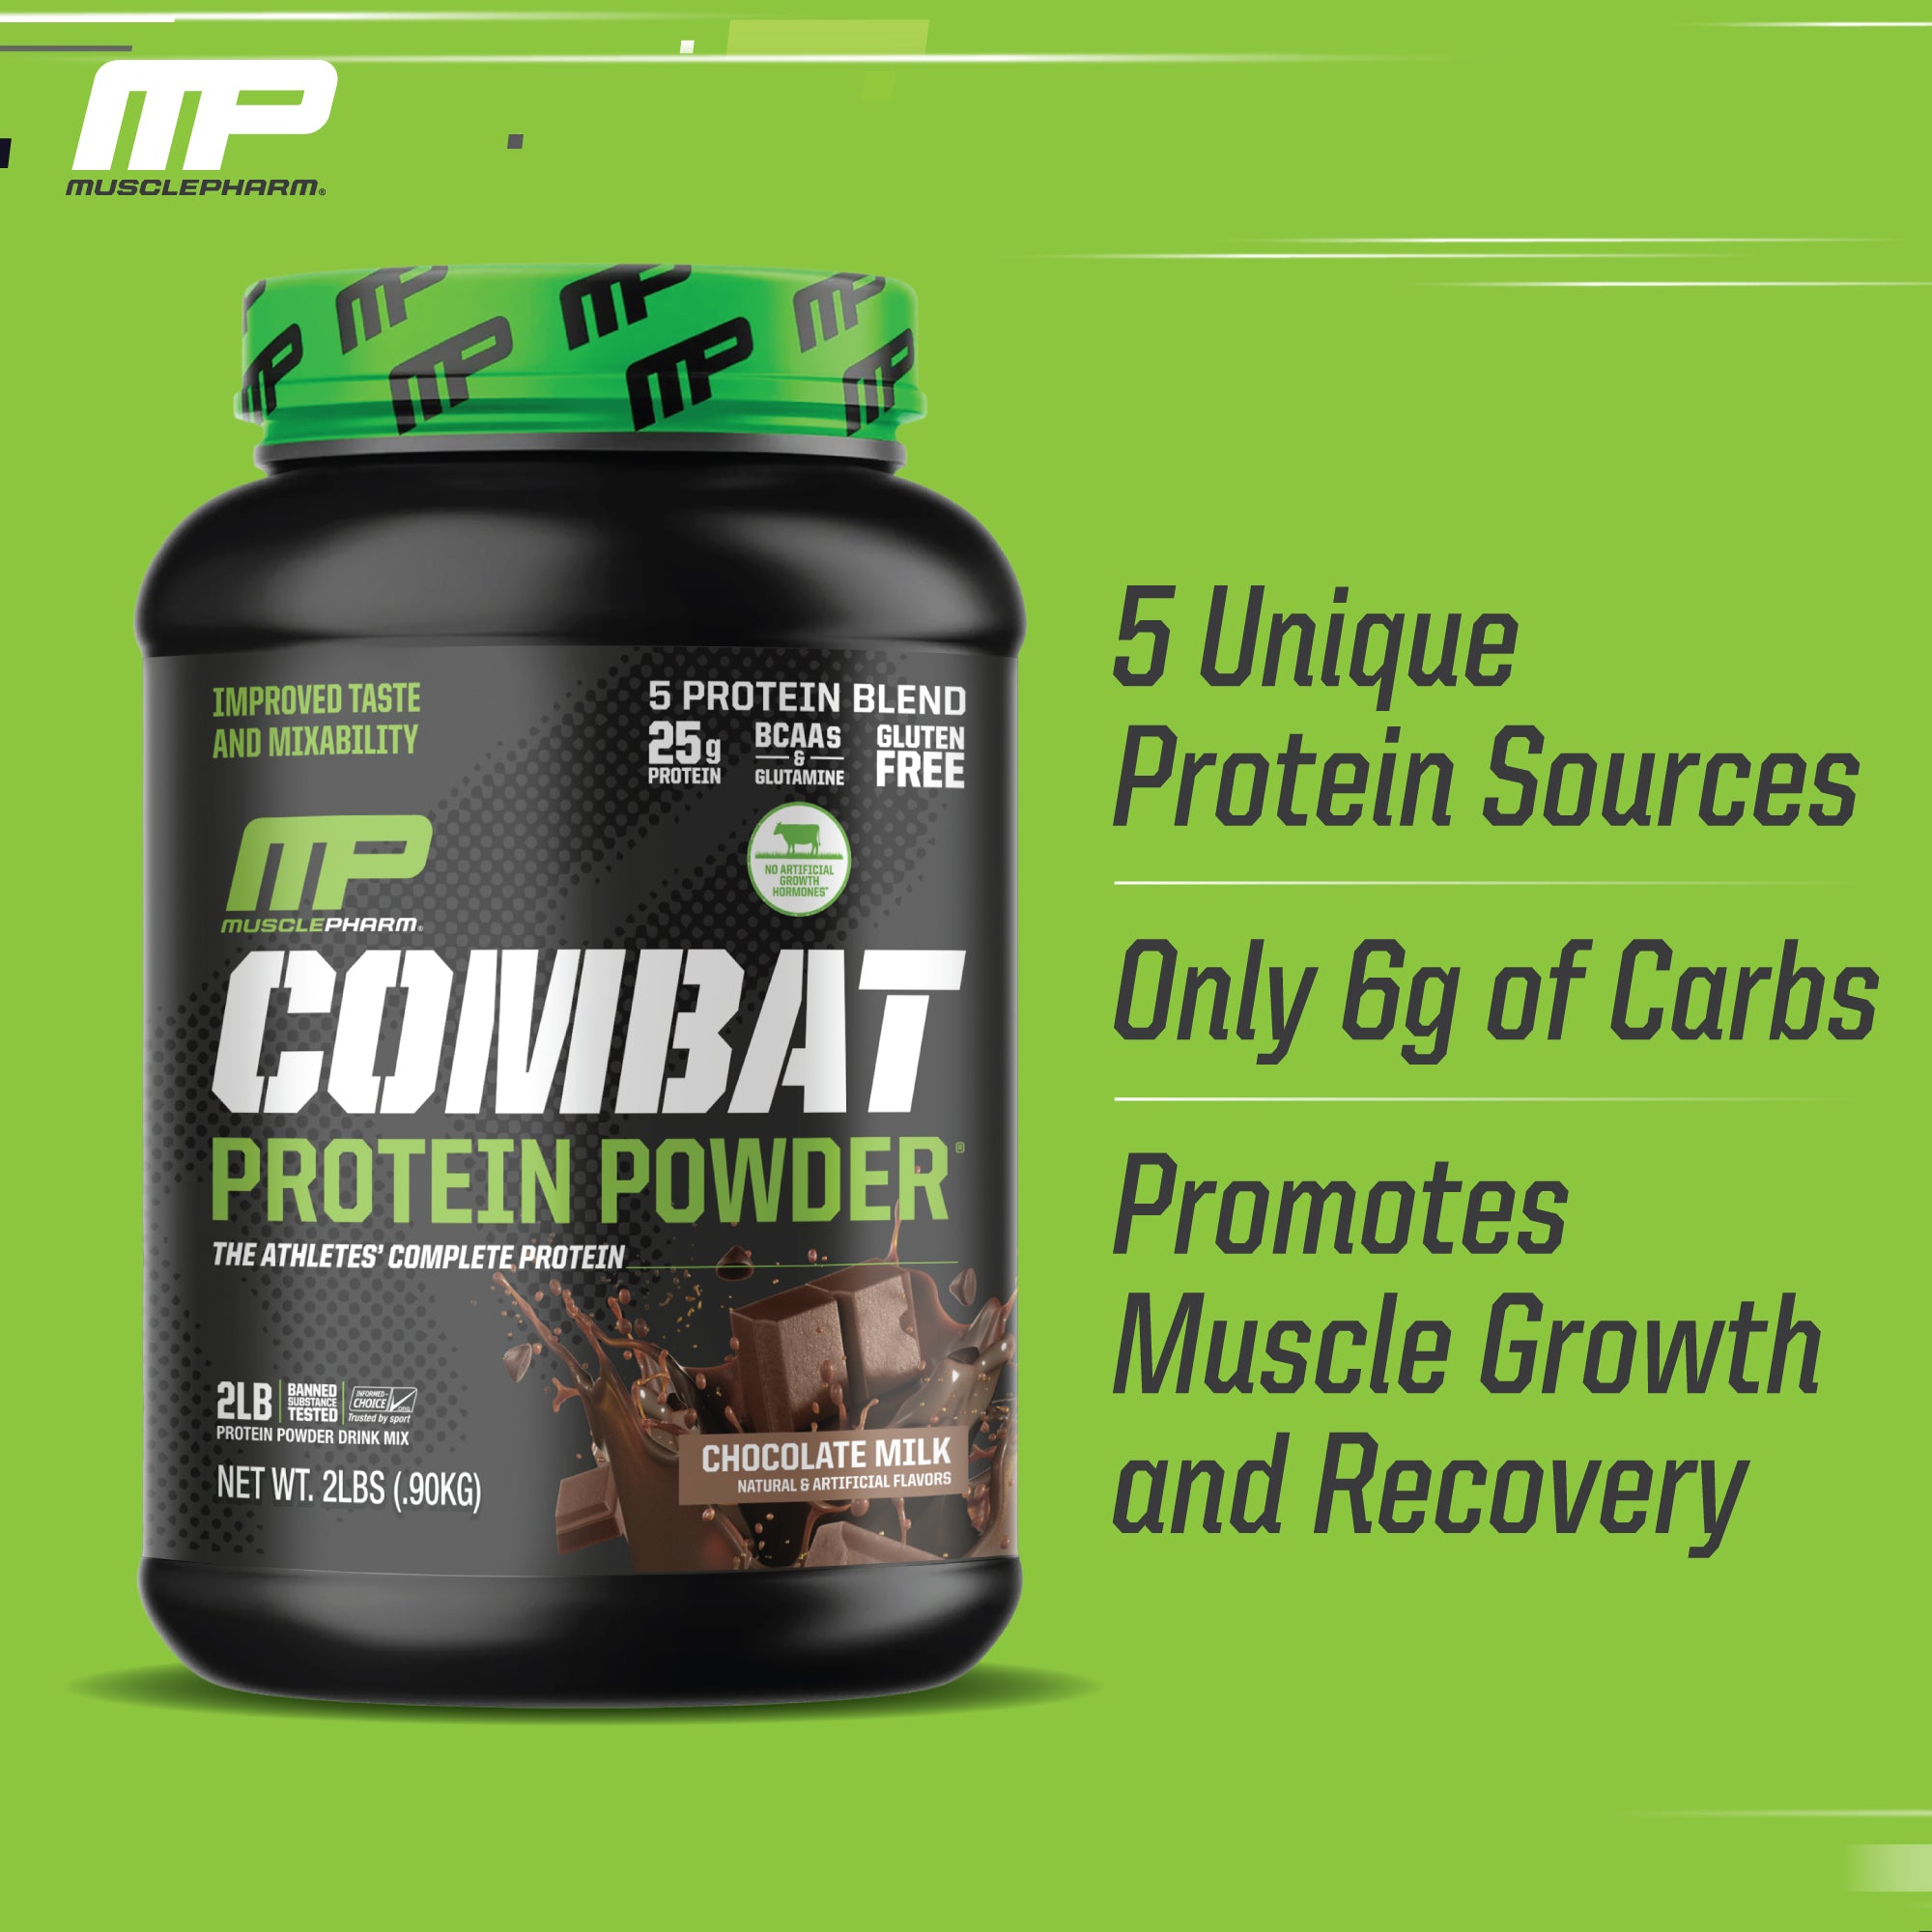 Proteinbolaget introduces the cost-competitive brand Fitness Junkie